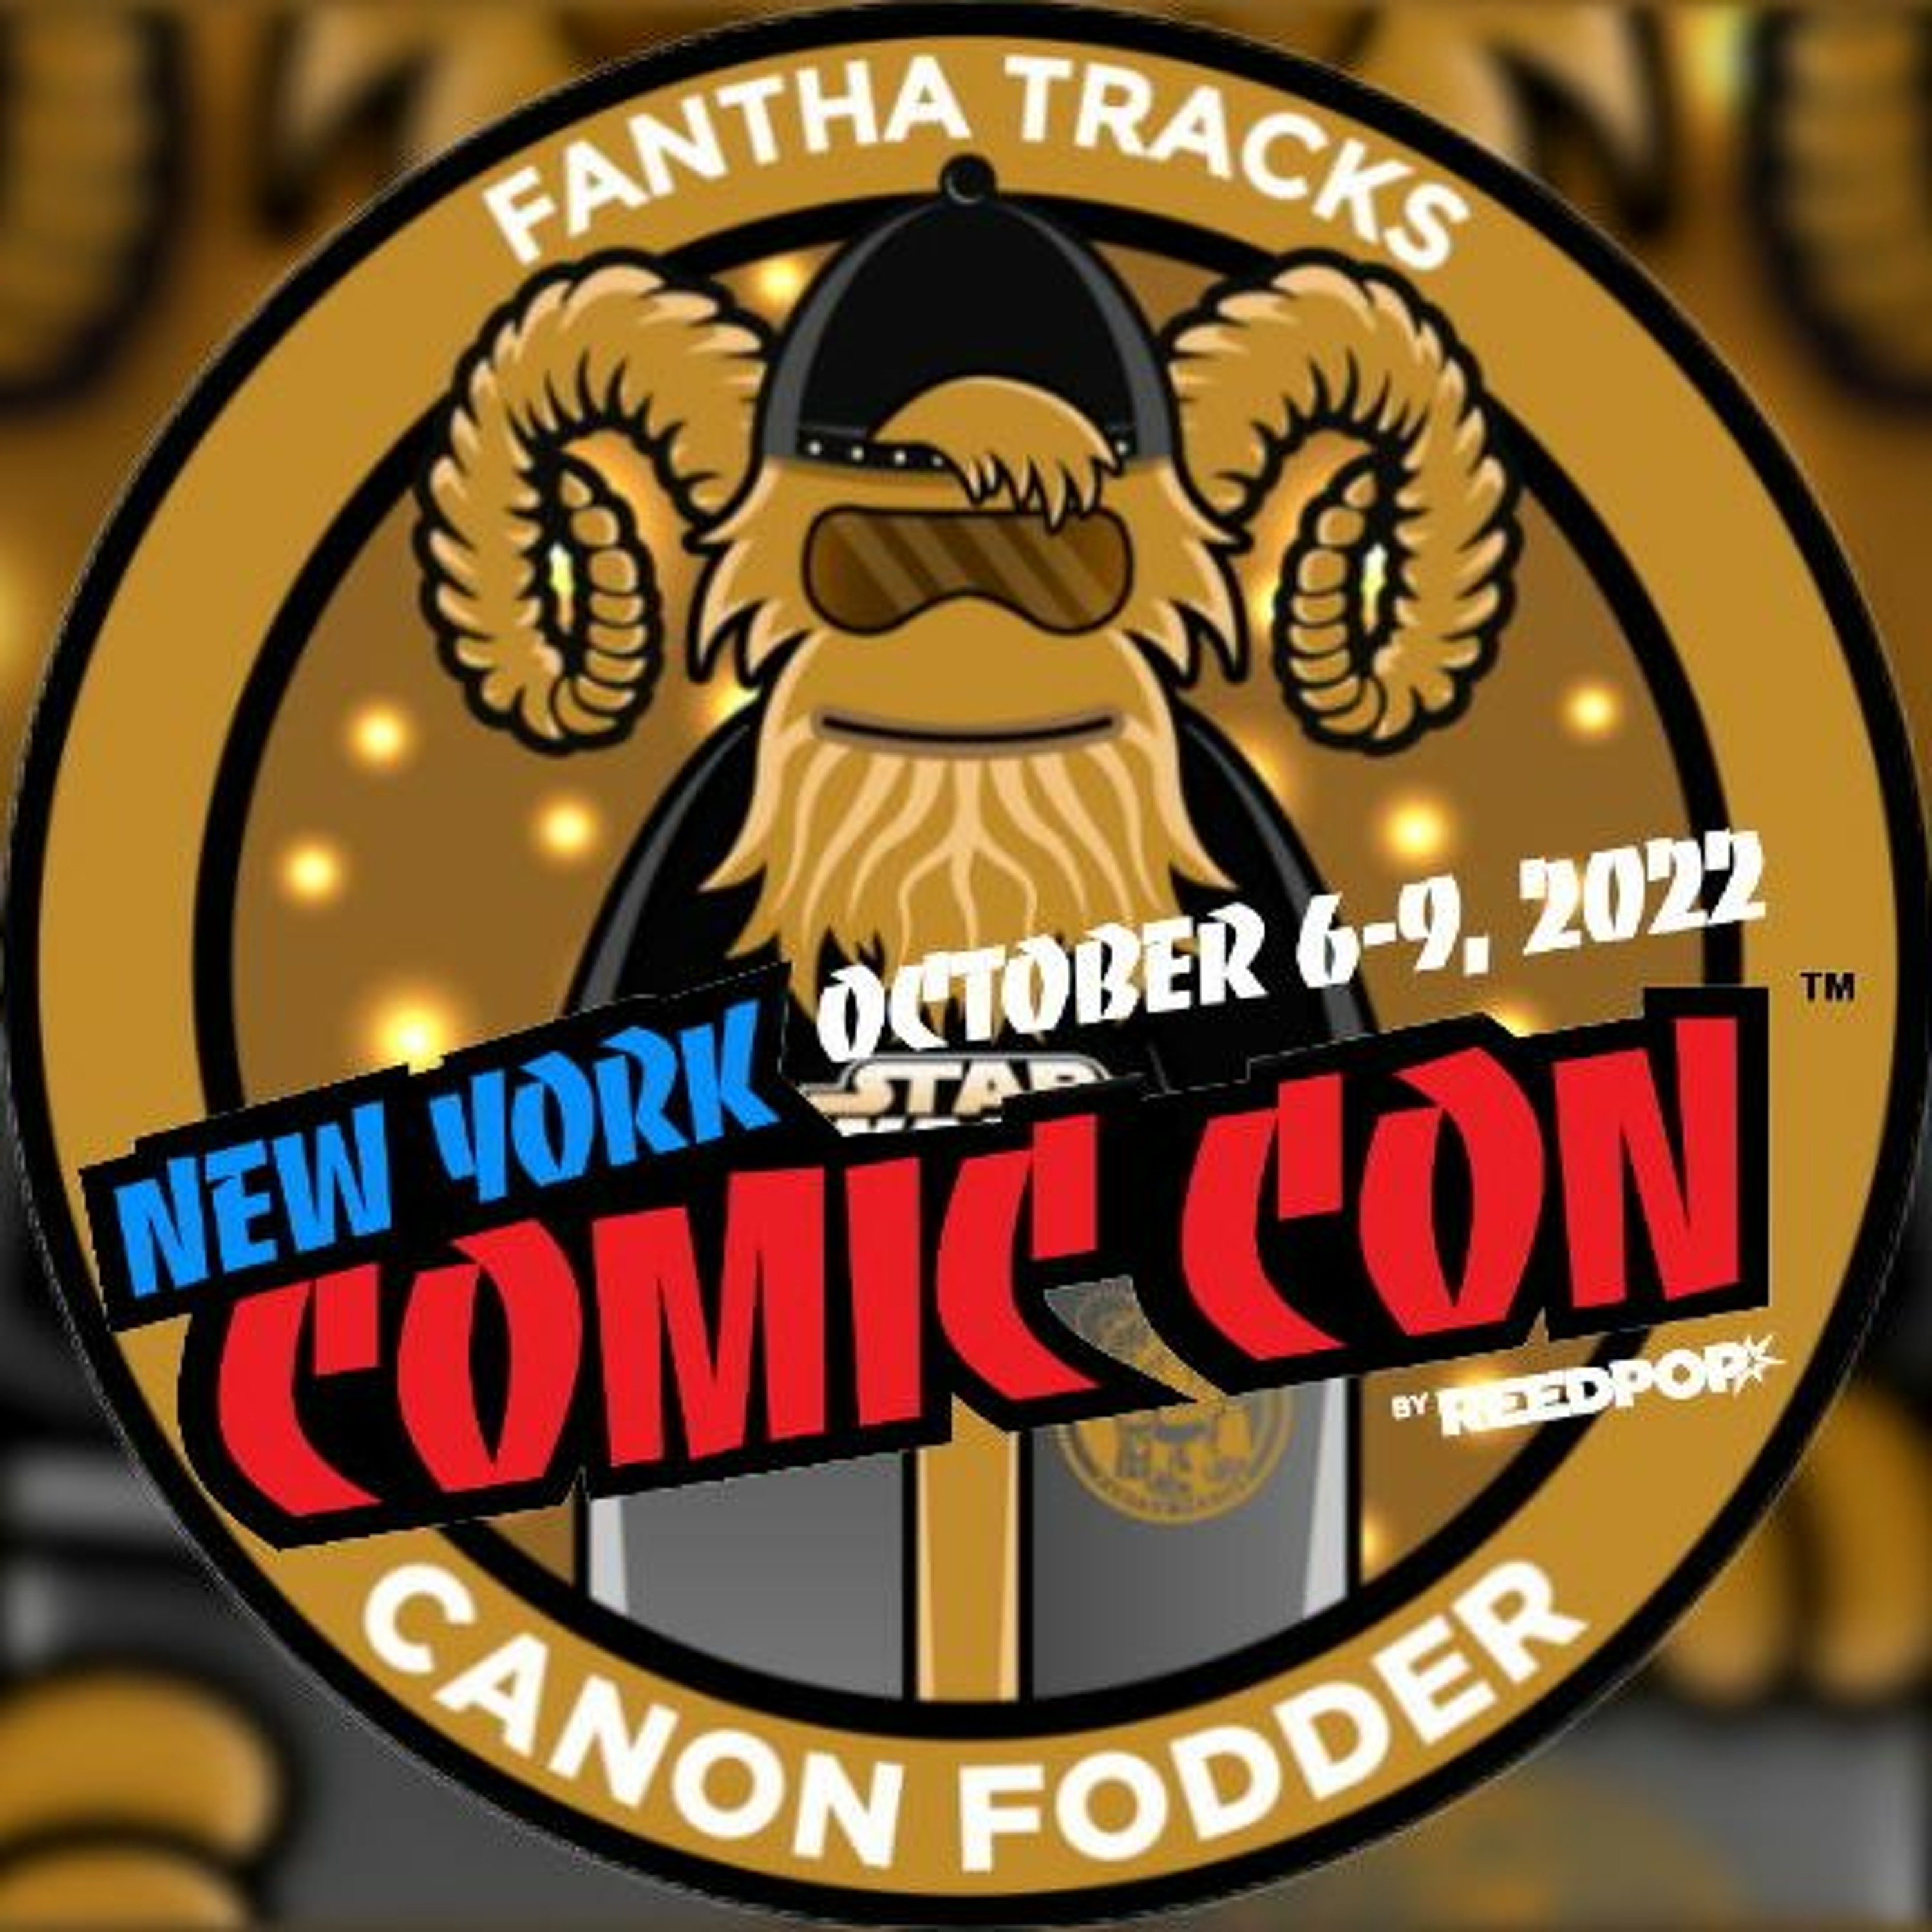 Canon Fodder at New York Comic Con 2022: Star Wars: Stories From A Galaxy Far, Far Away...panel